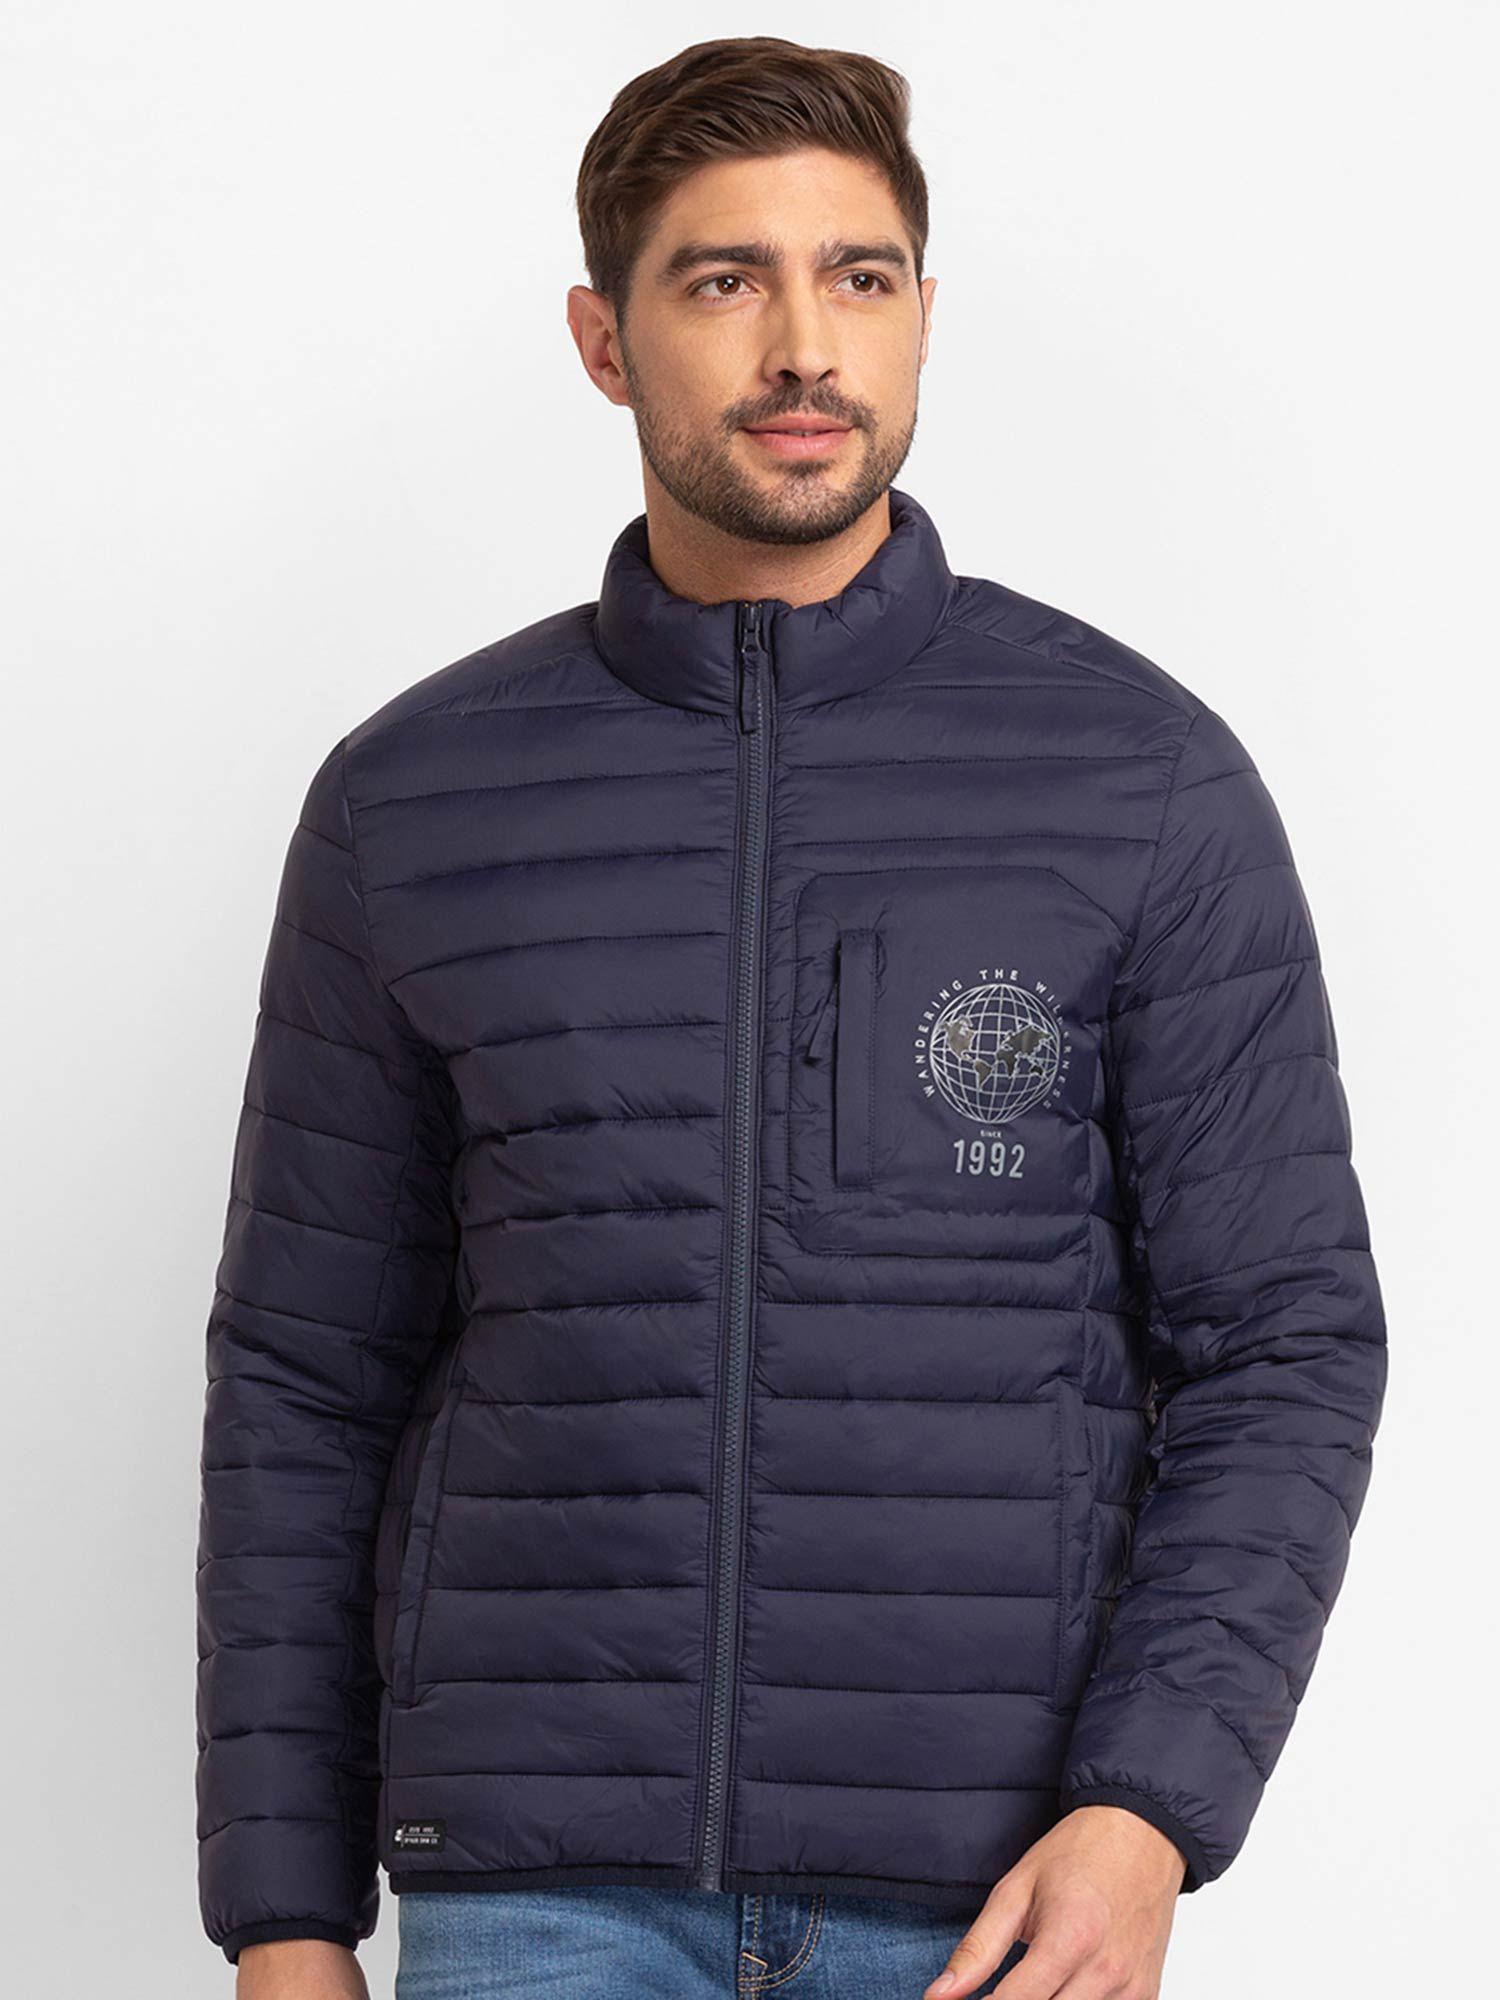 navy blue cotton full sleeve casual jacket for men